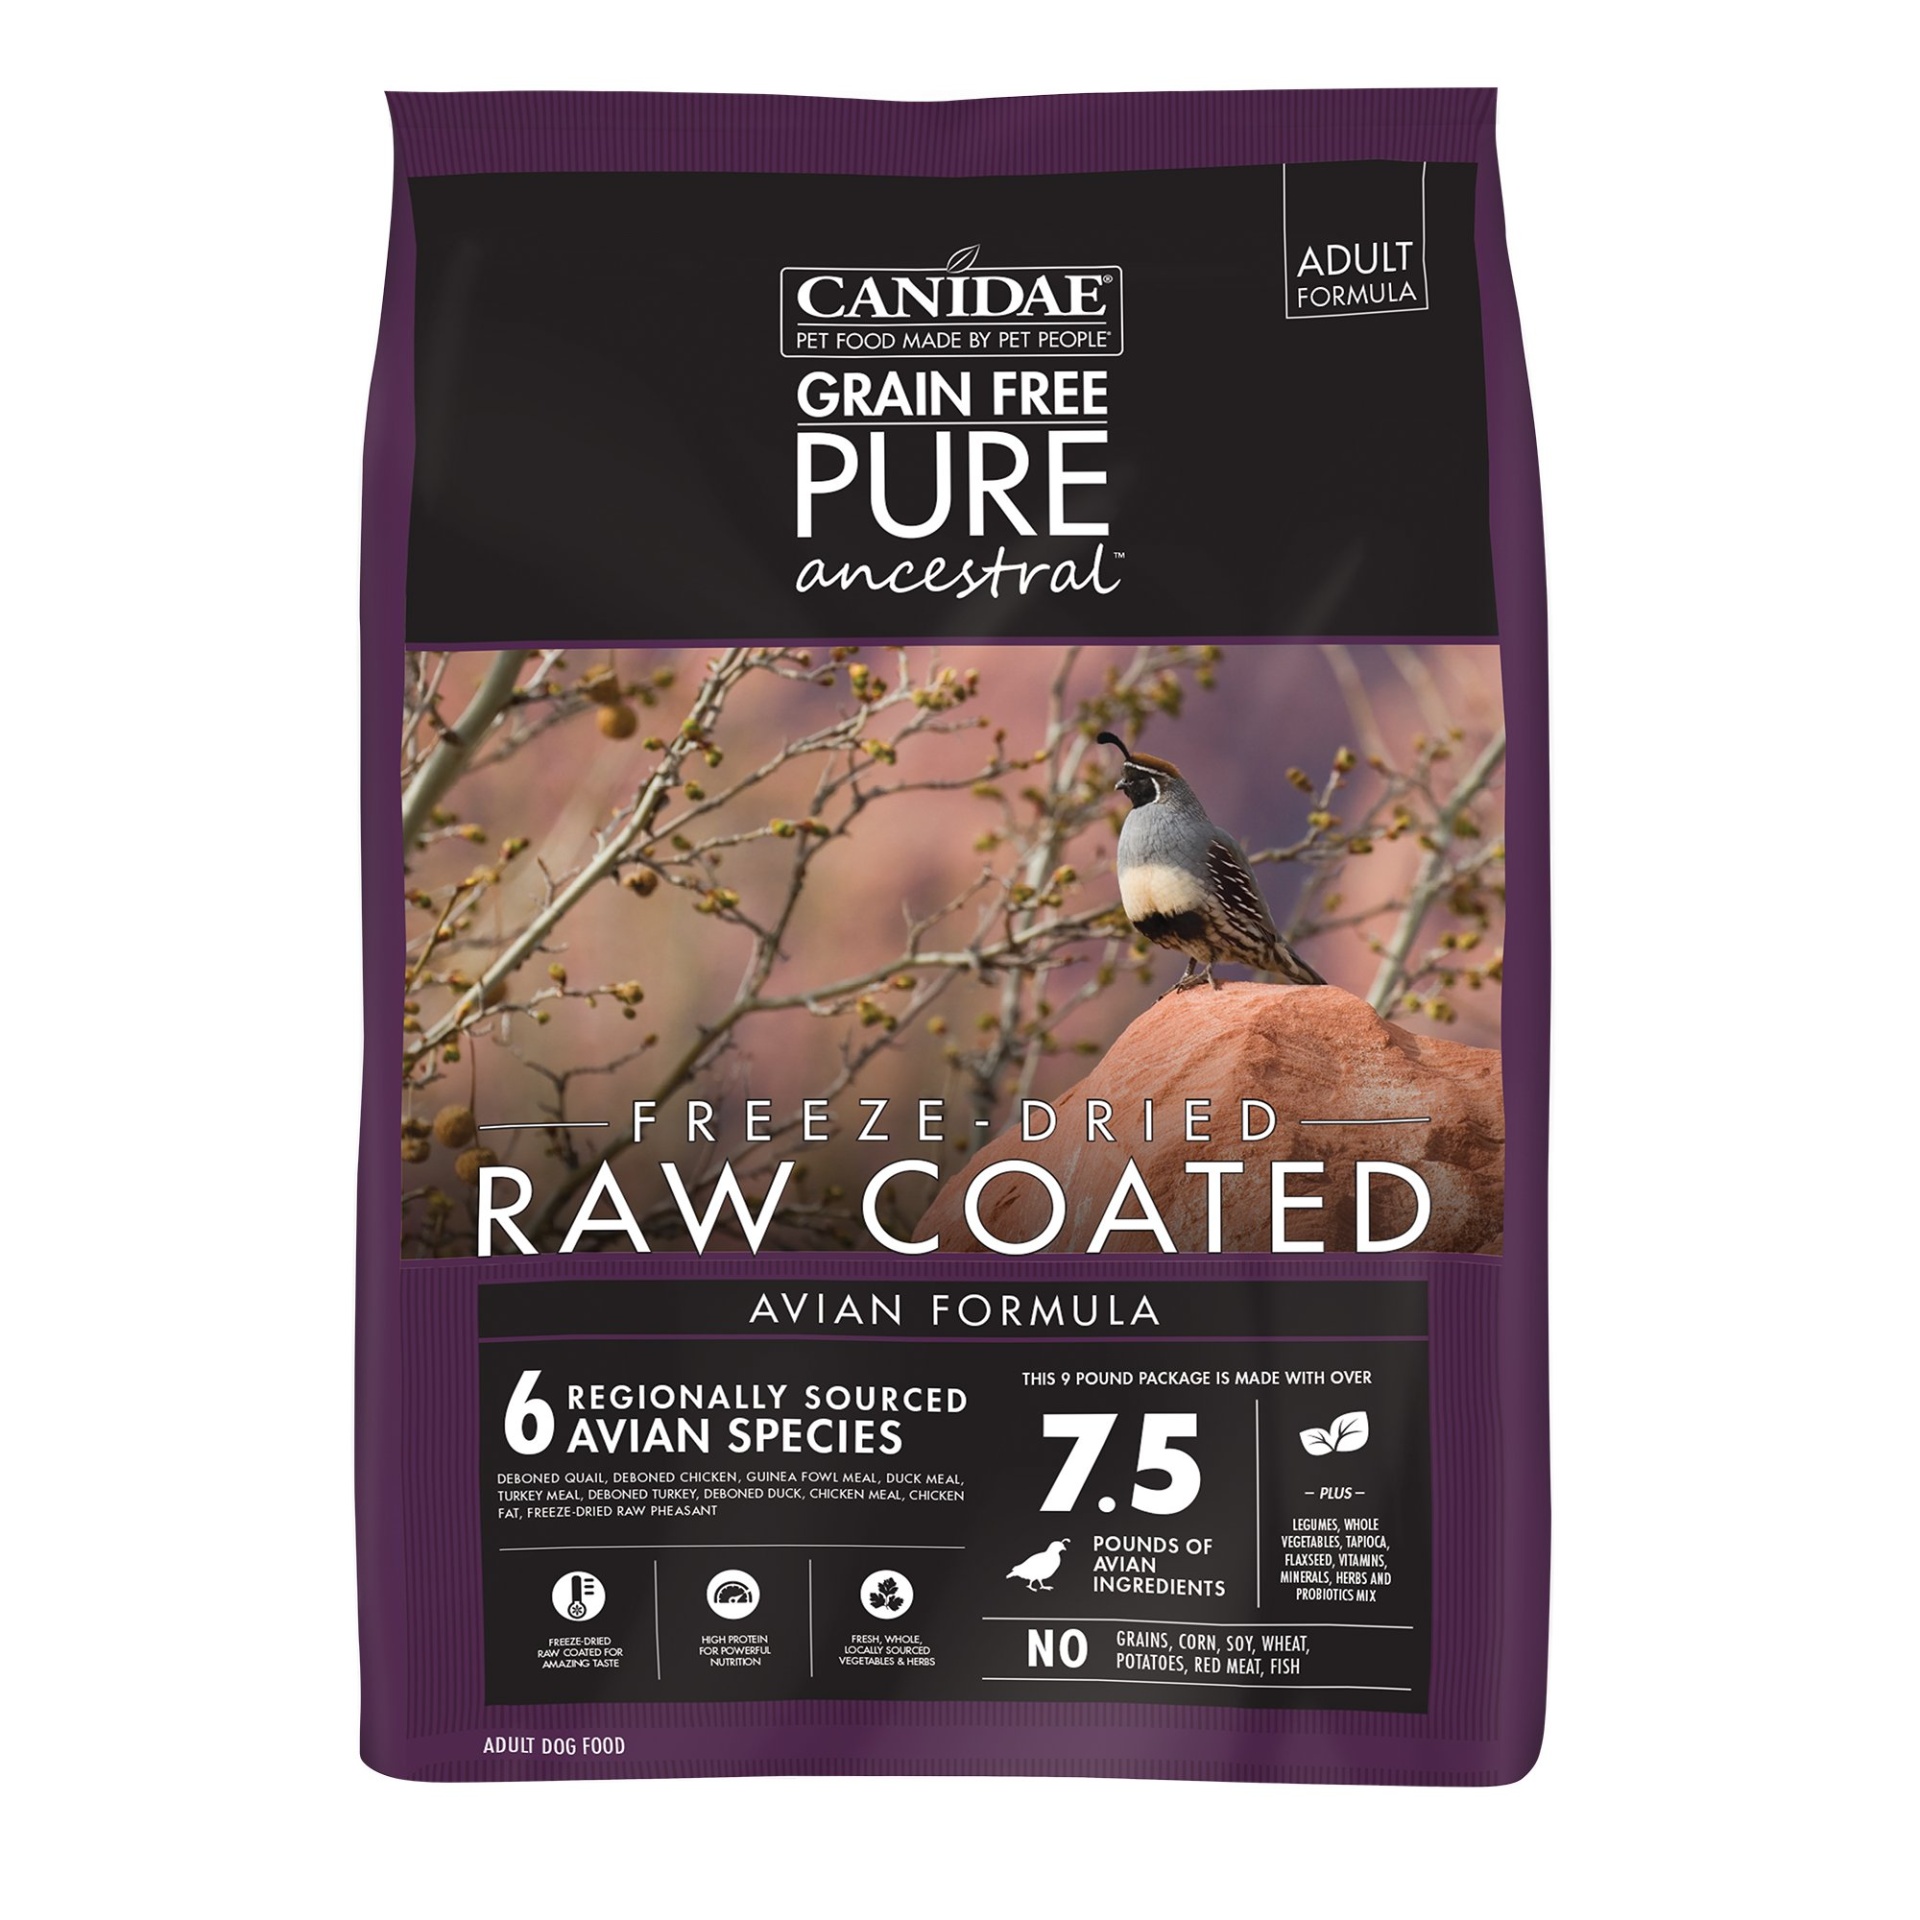 slide 1 of 1, CANIDAE Grain Free PURE Ancestral Diet Dog Dry Raw Coated Avian Formula with Quail, Chicken, & Turkey, 9 lb